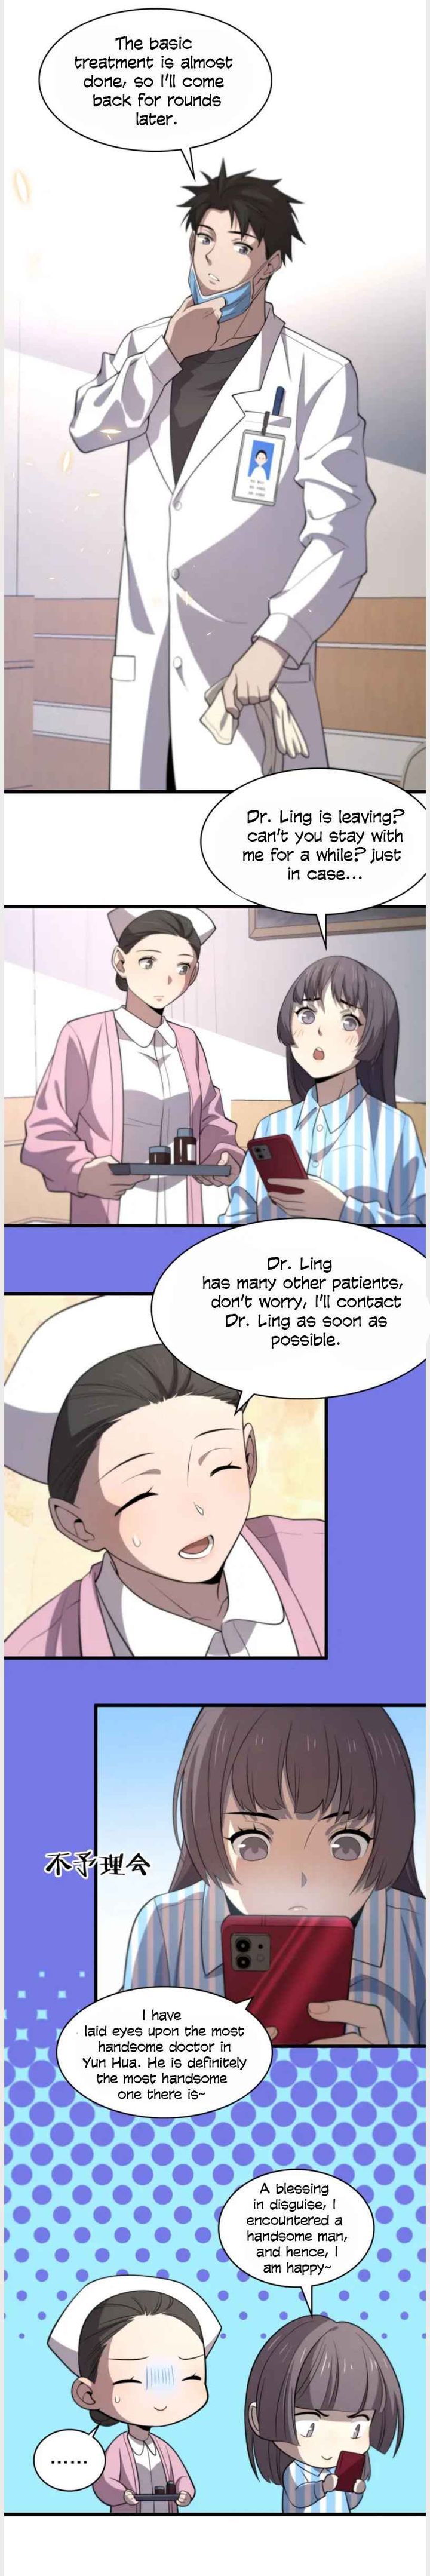 great_doctor_ling_ran_50_11